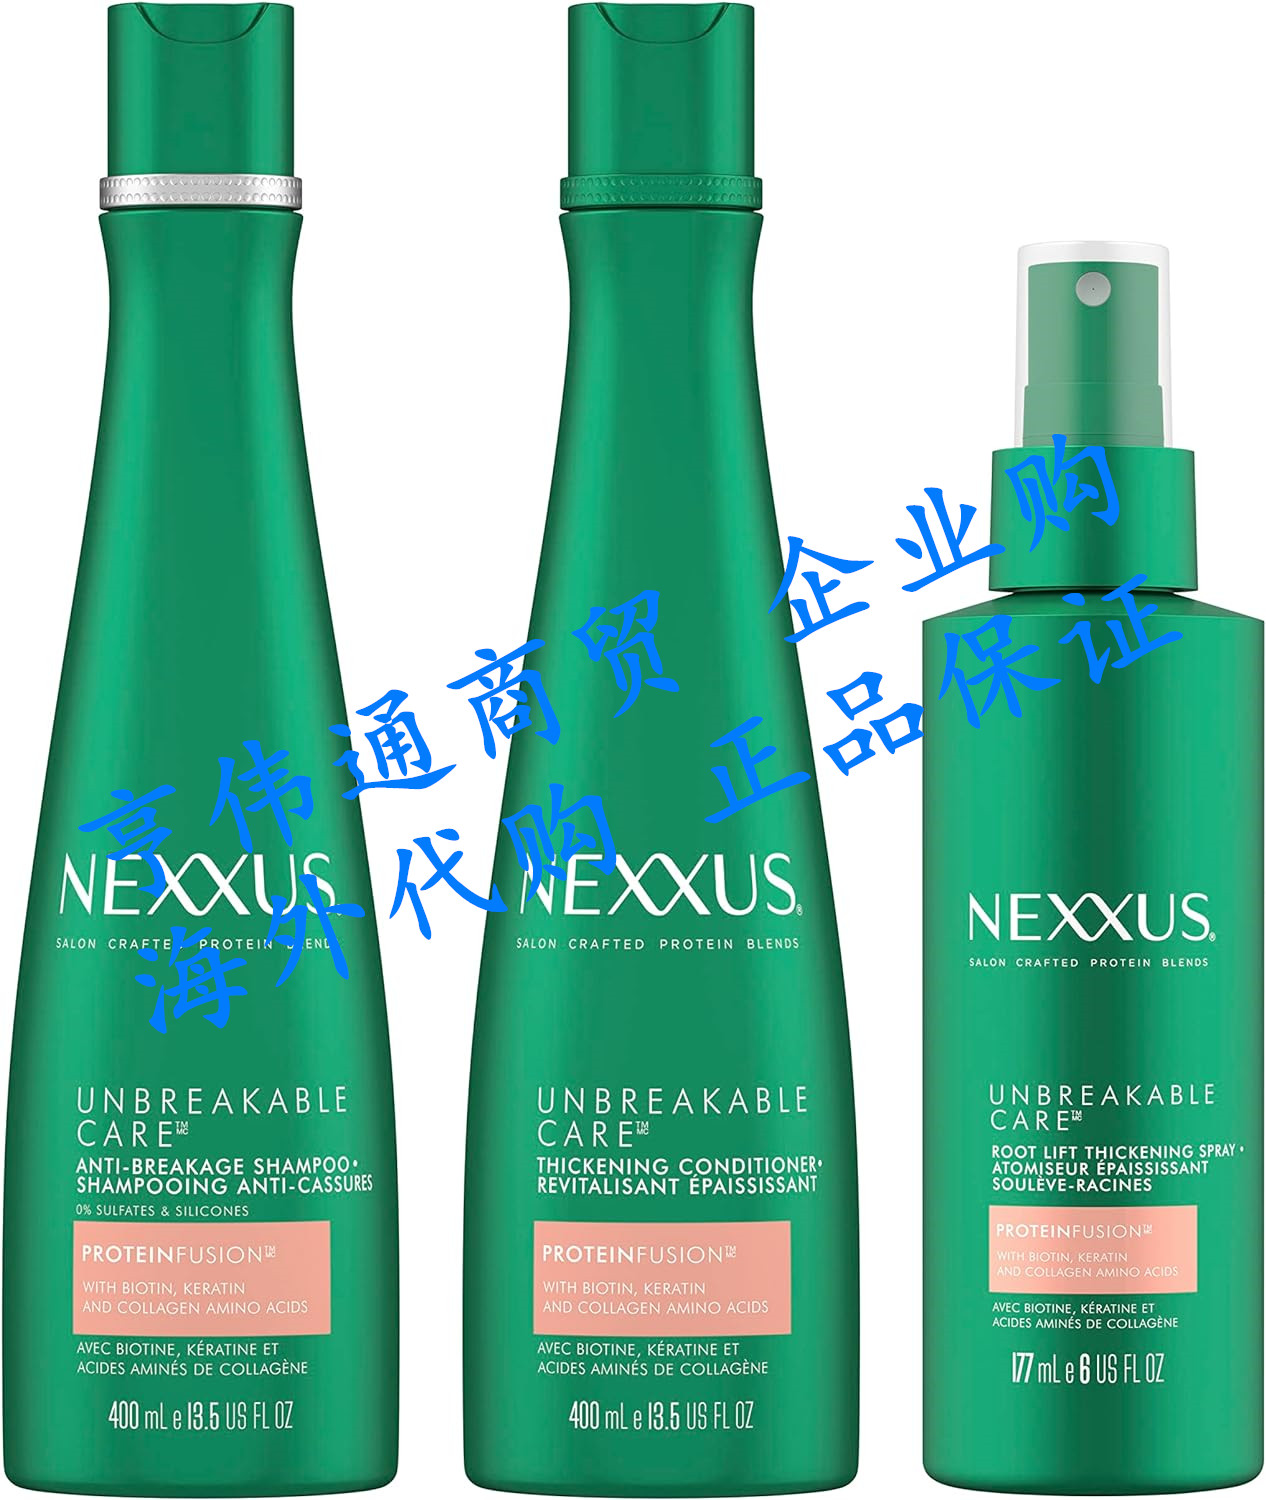 Nexxus Unbreakable Care Shampoo, Conditioner, and Leave-In